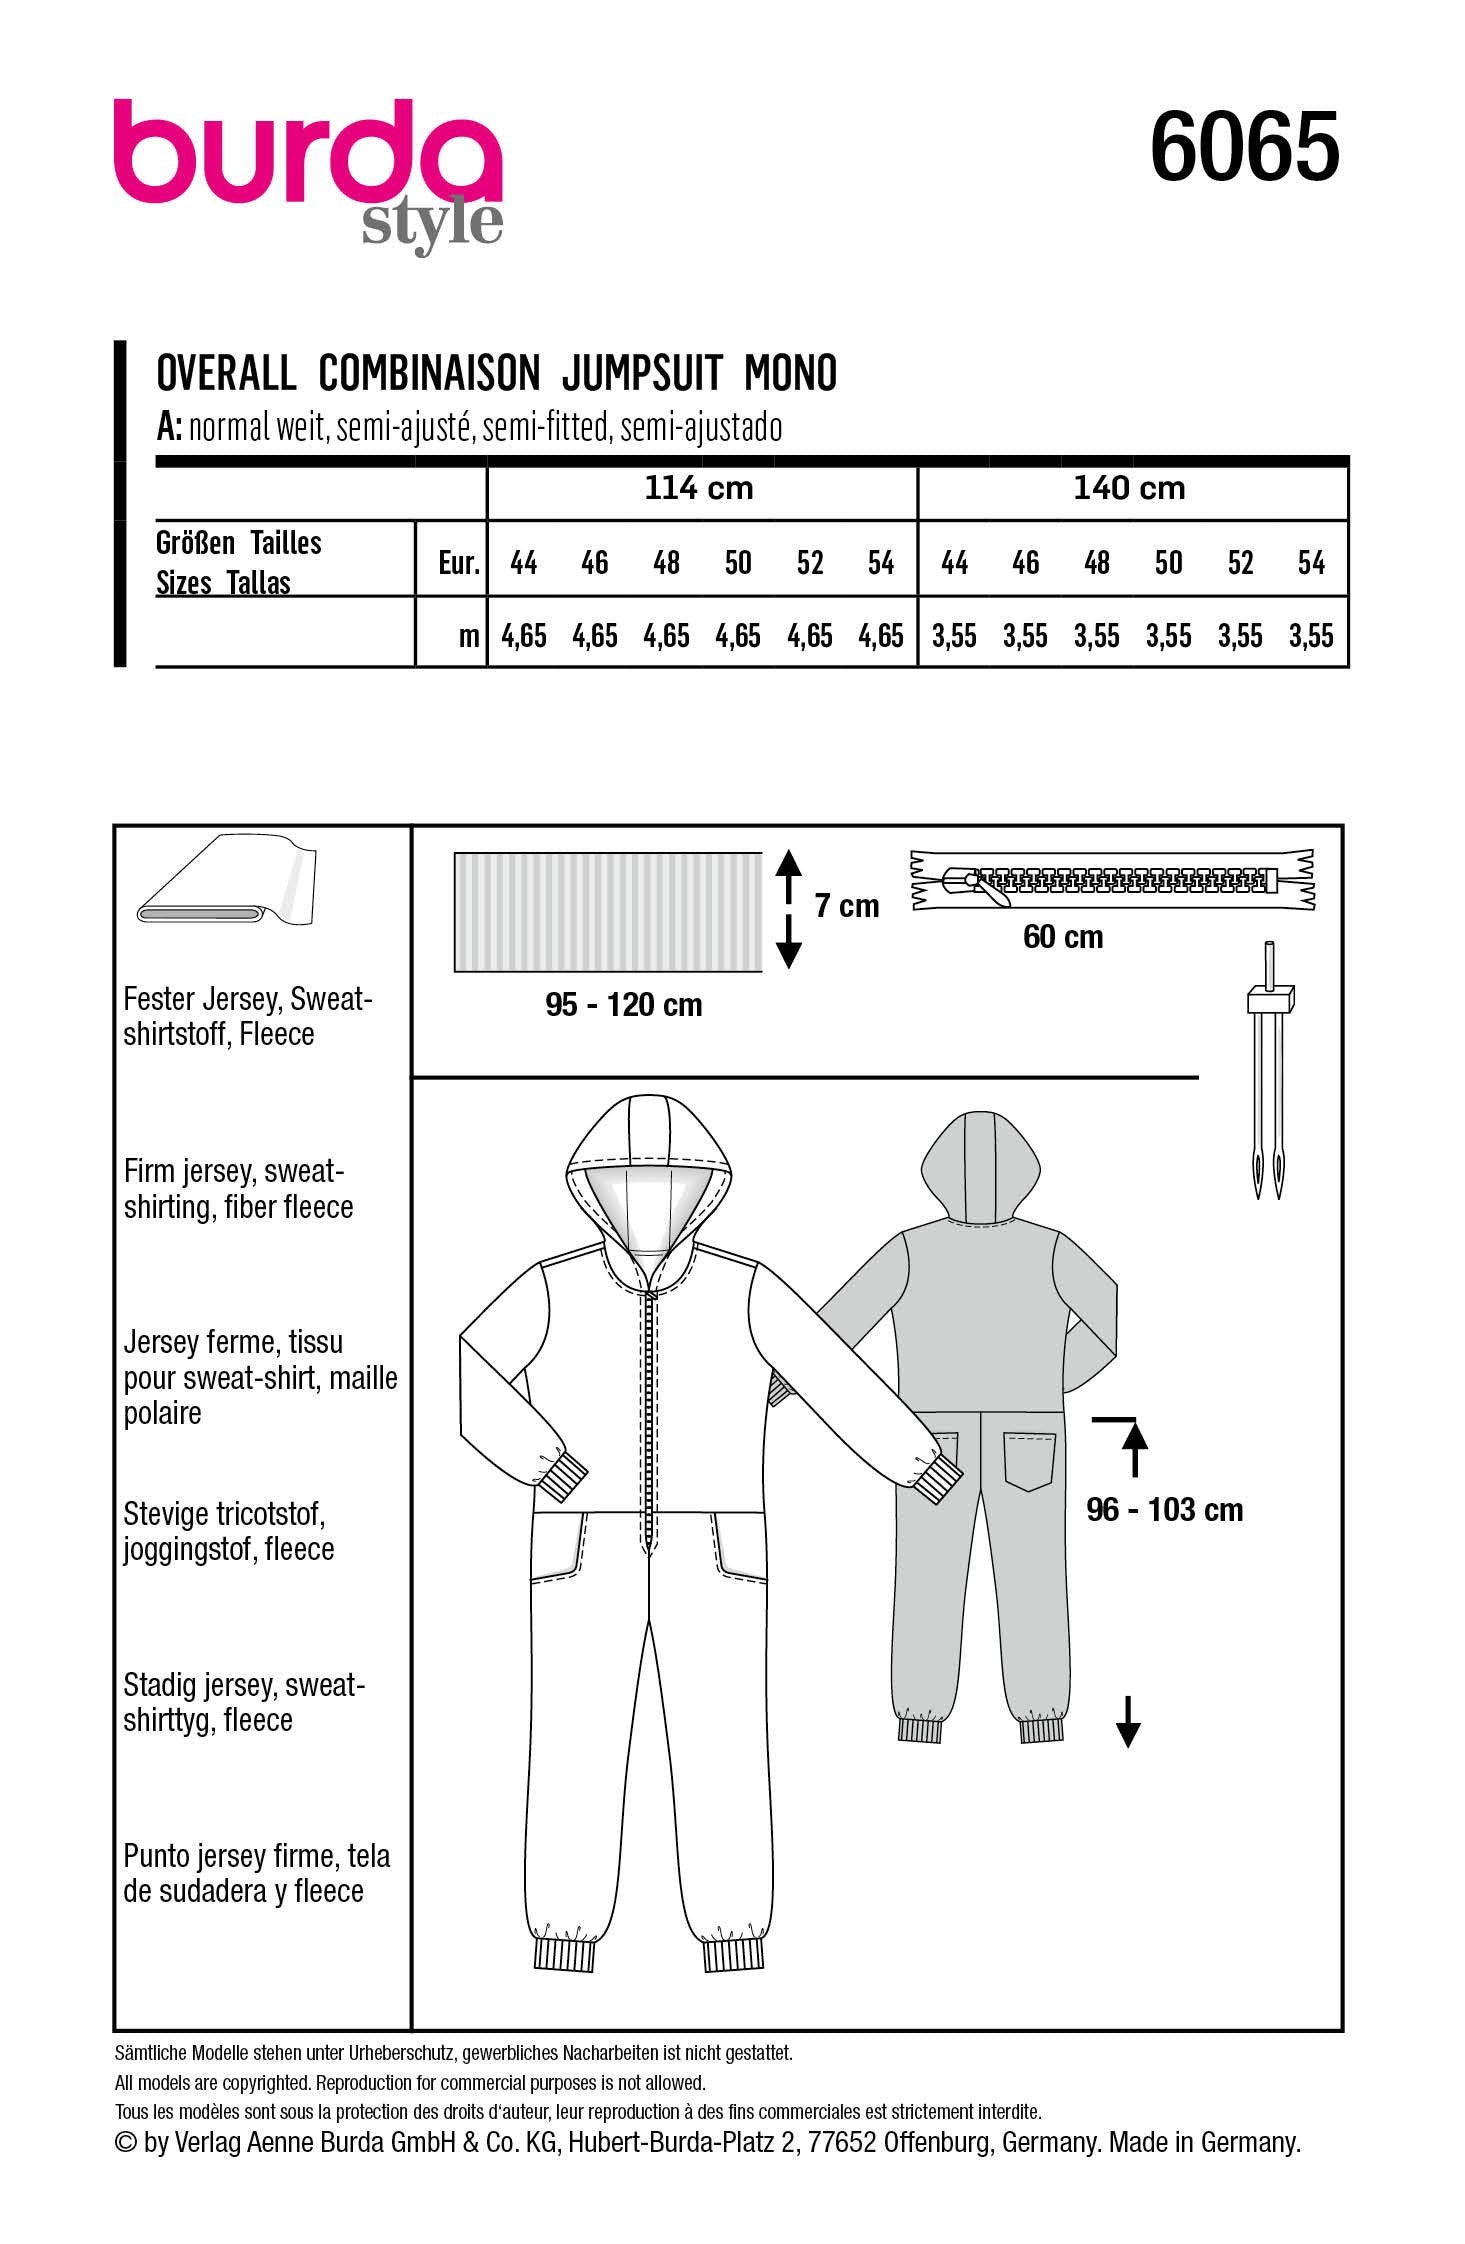 Burda Sewing Pattern 6065 Men's Overalls with Hood from Jaycotts Sewing Supplies